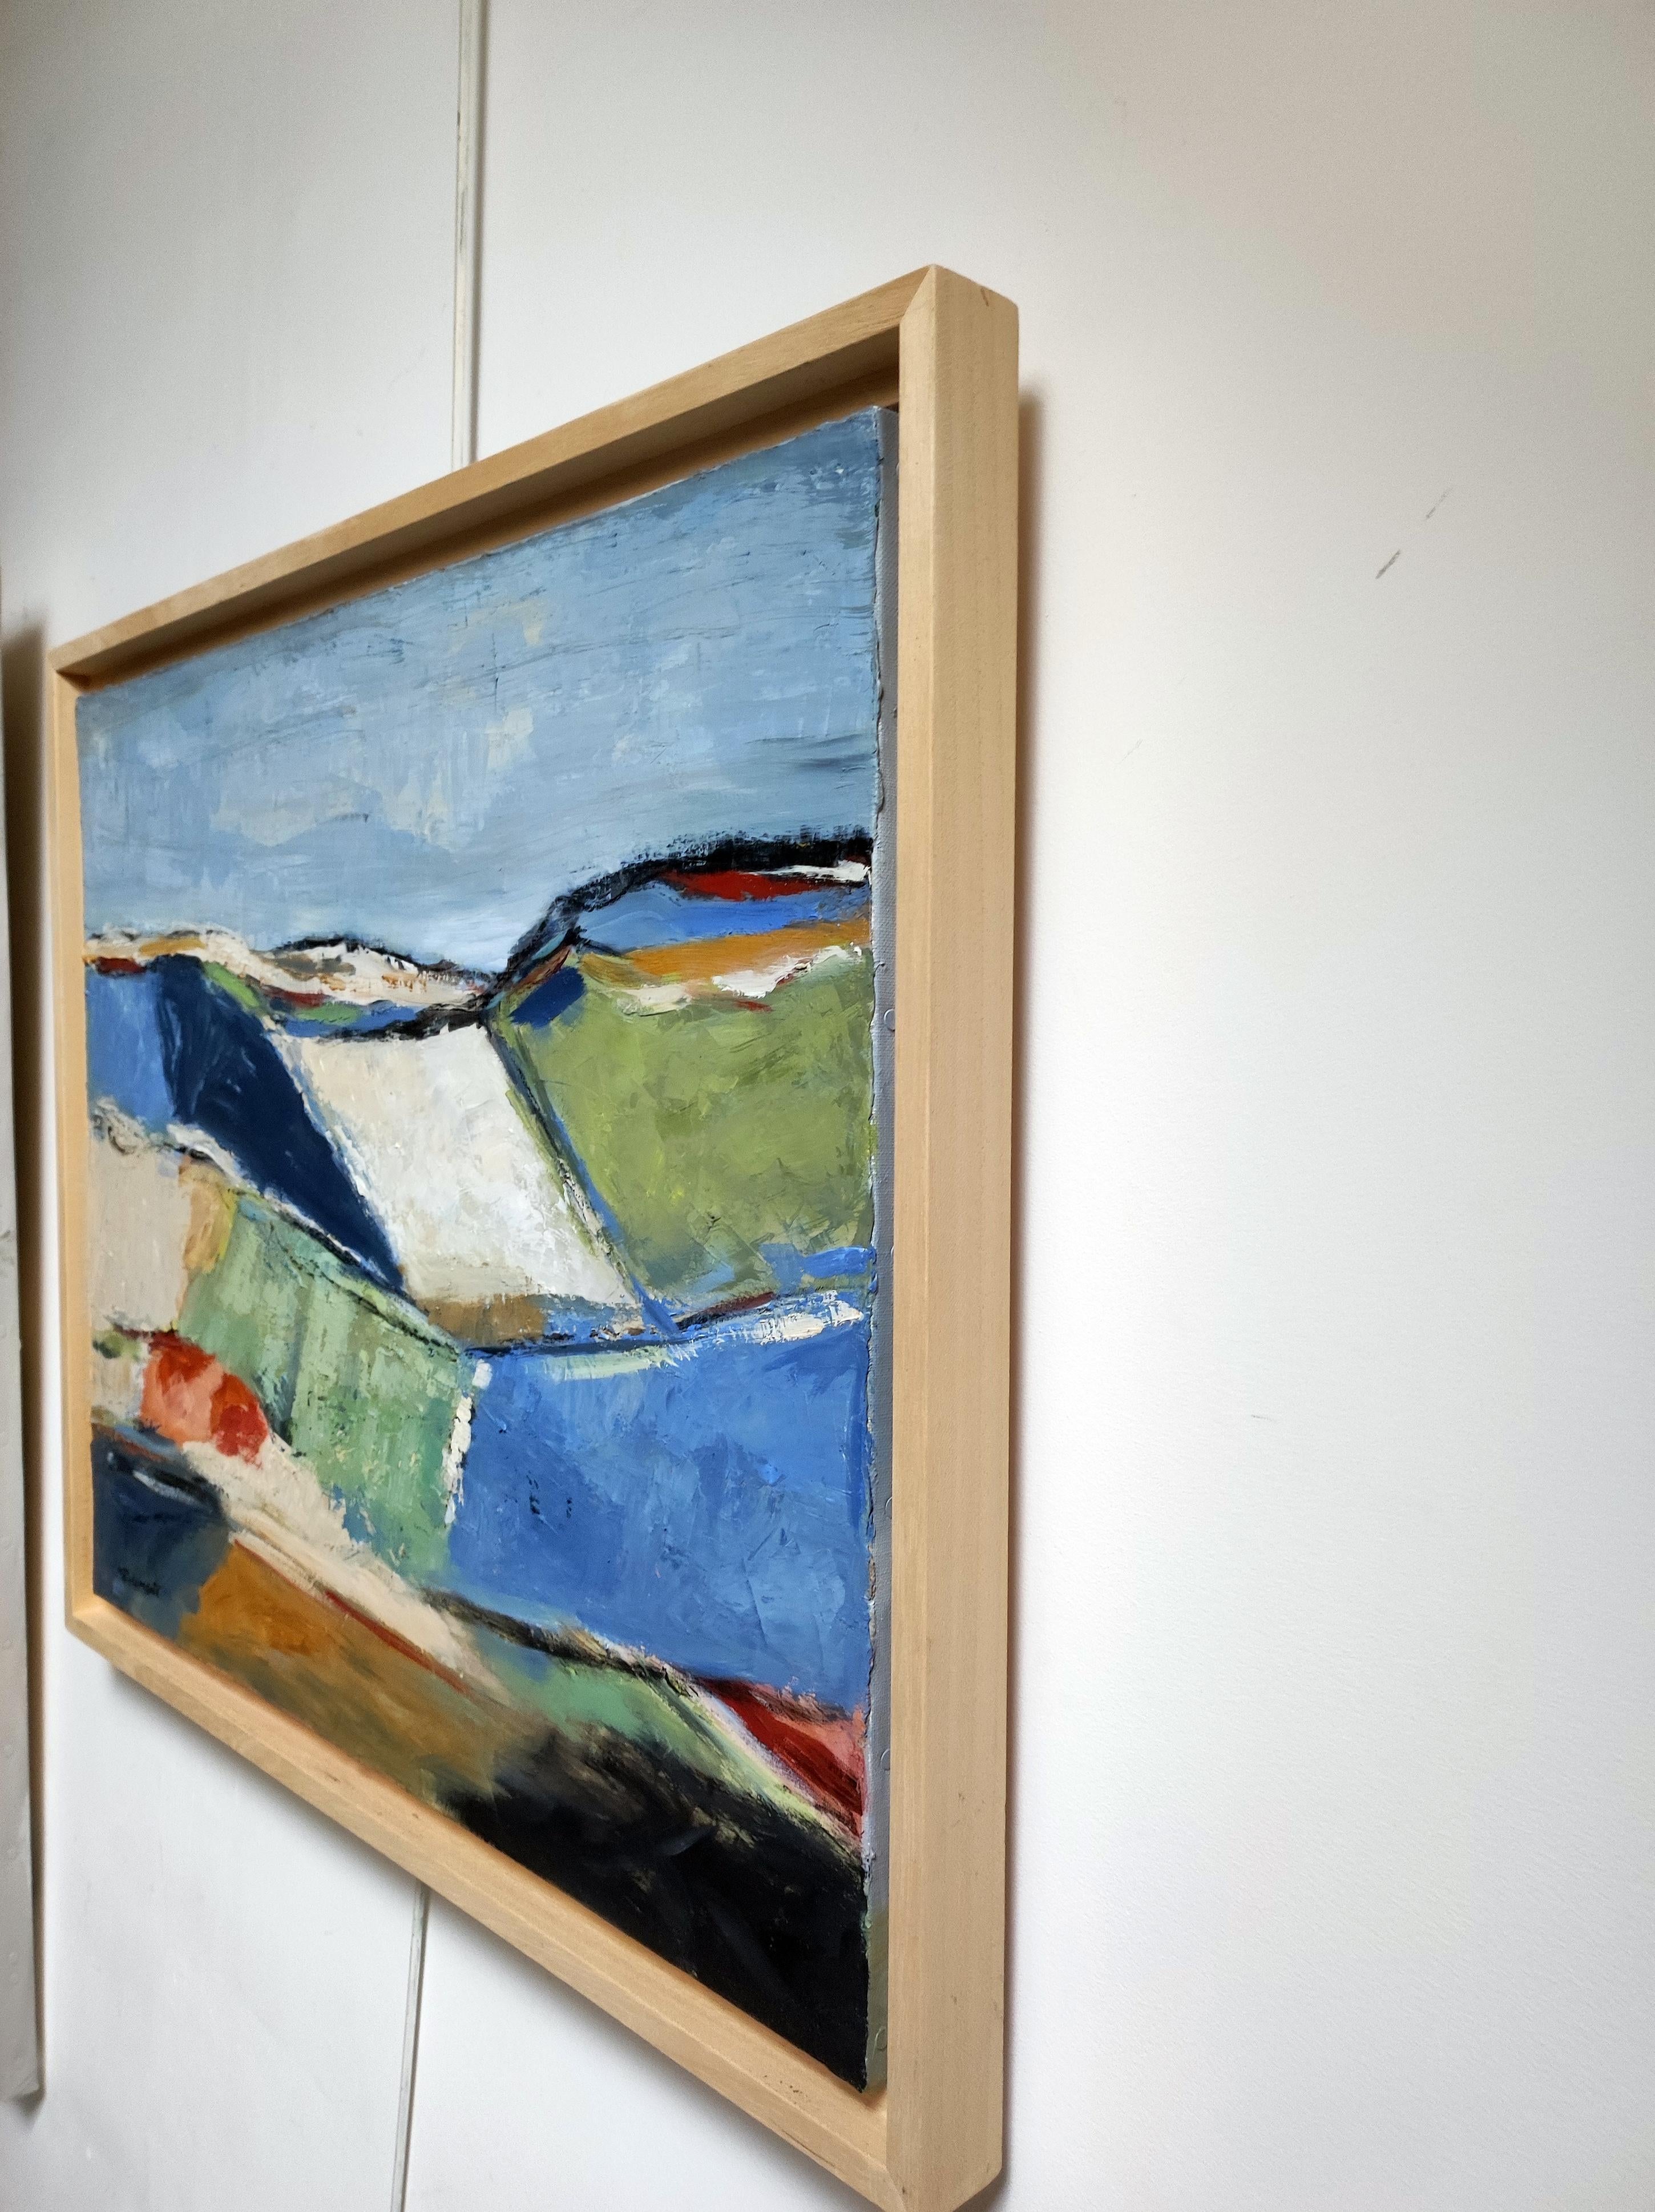 In her exploration of the Normandy fields, Sophie Dumont has not merely depicted a landscape but has captured its very soul. Her abstract landscapes are a testament to the power of art to transcend the physical and touch the spiritual. Through her